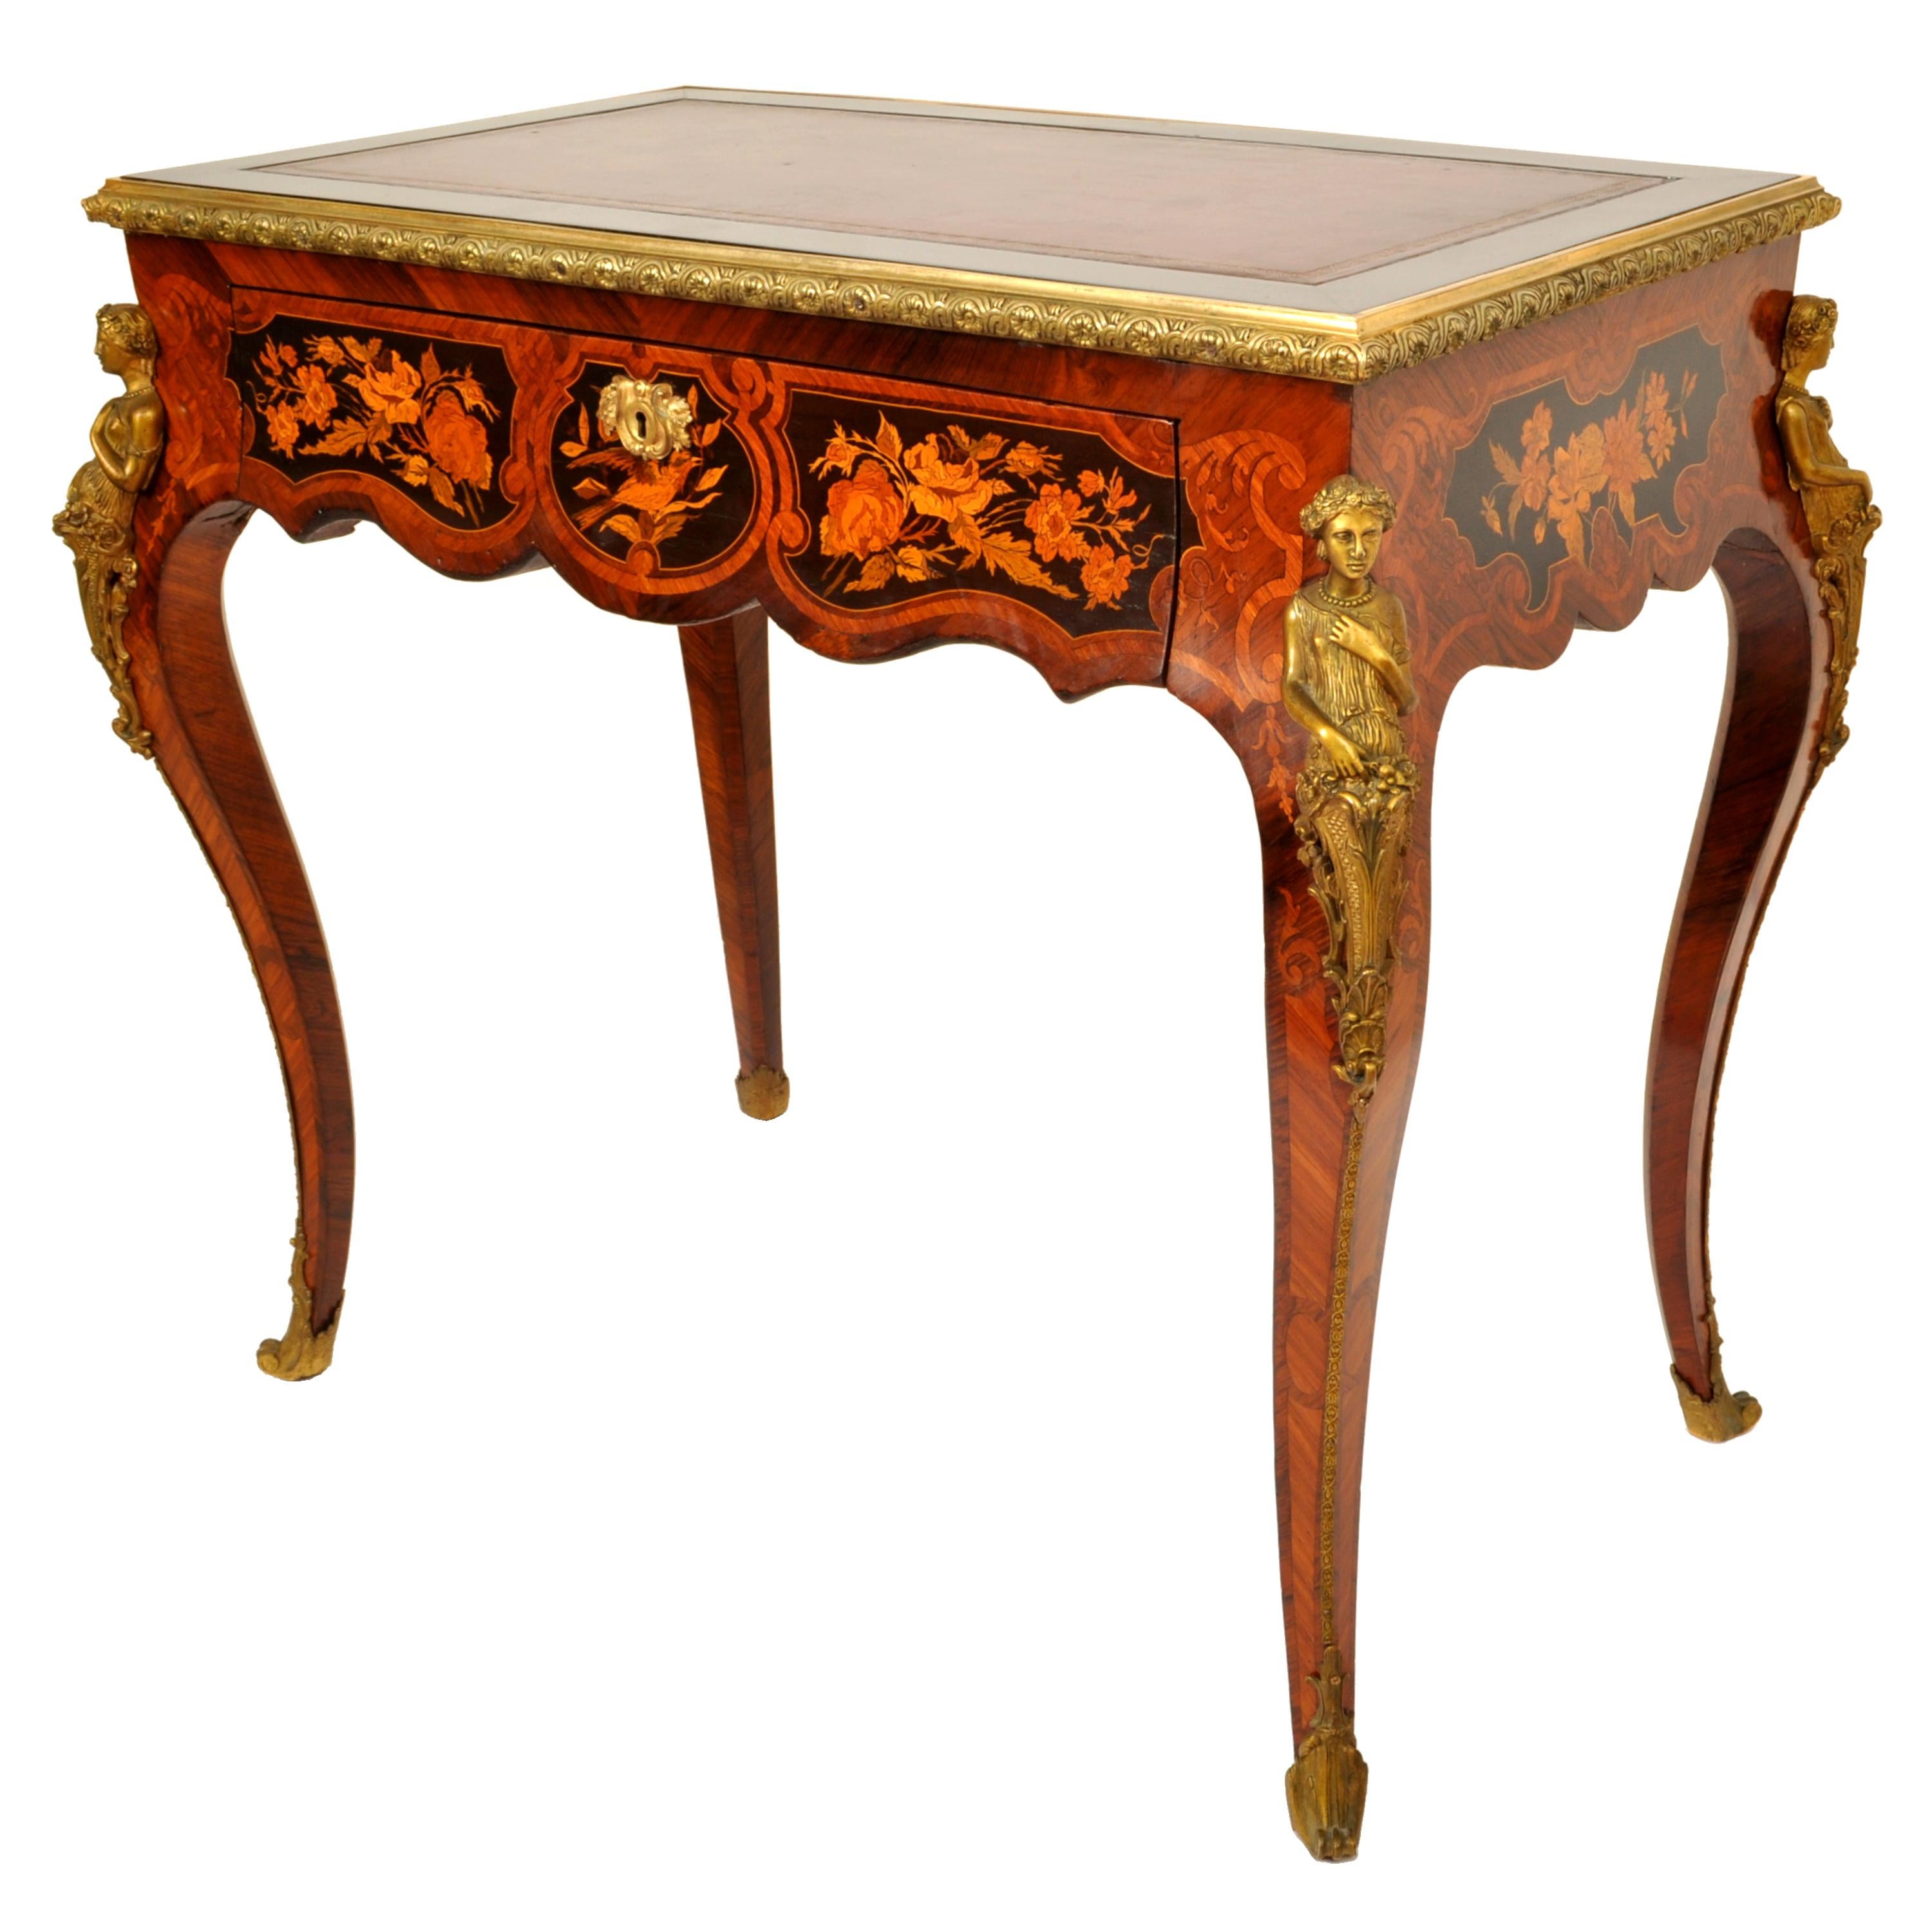 Late 19th Century Antique French 19th Century Louis XVI Marquetry Ormolu Writing Desk Table Linke